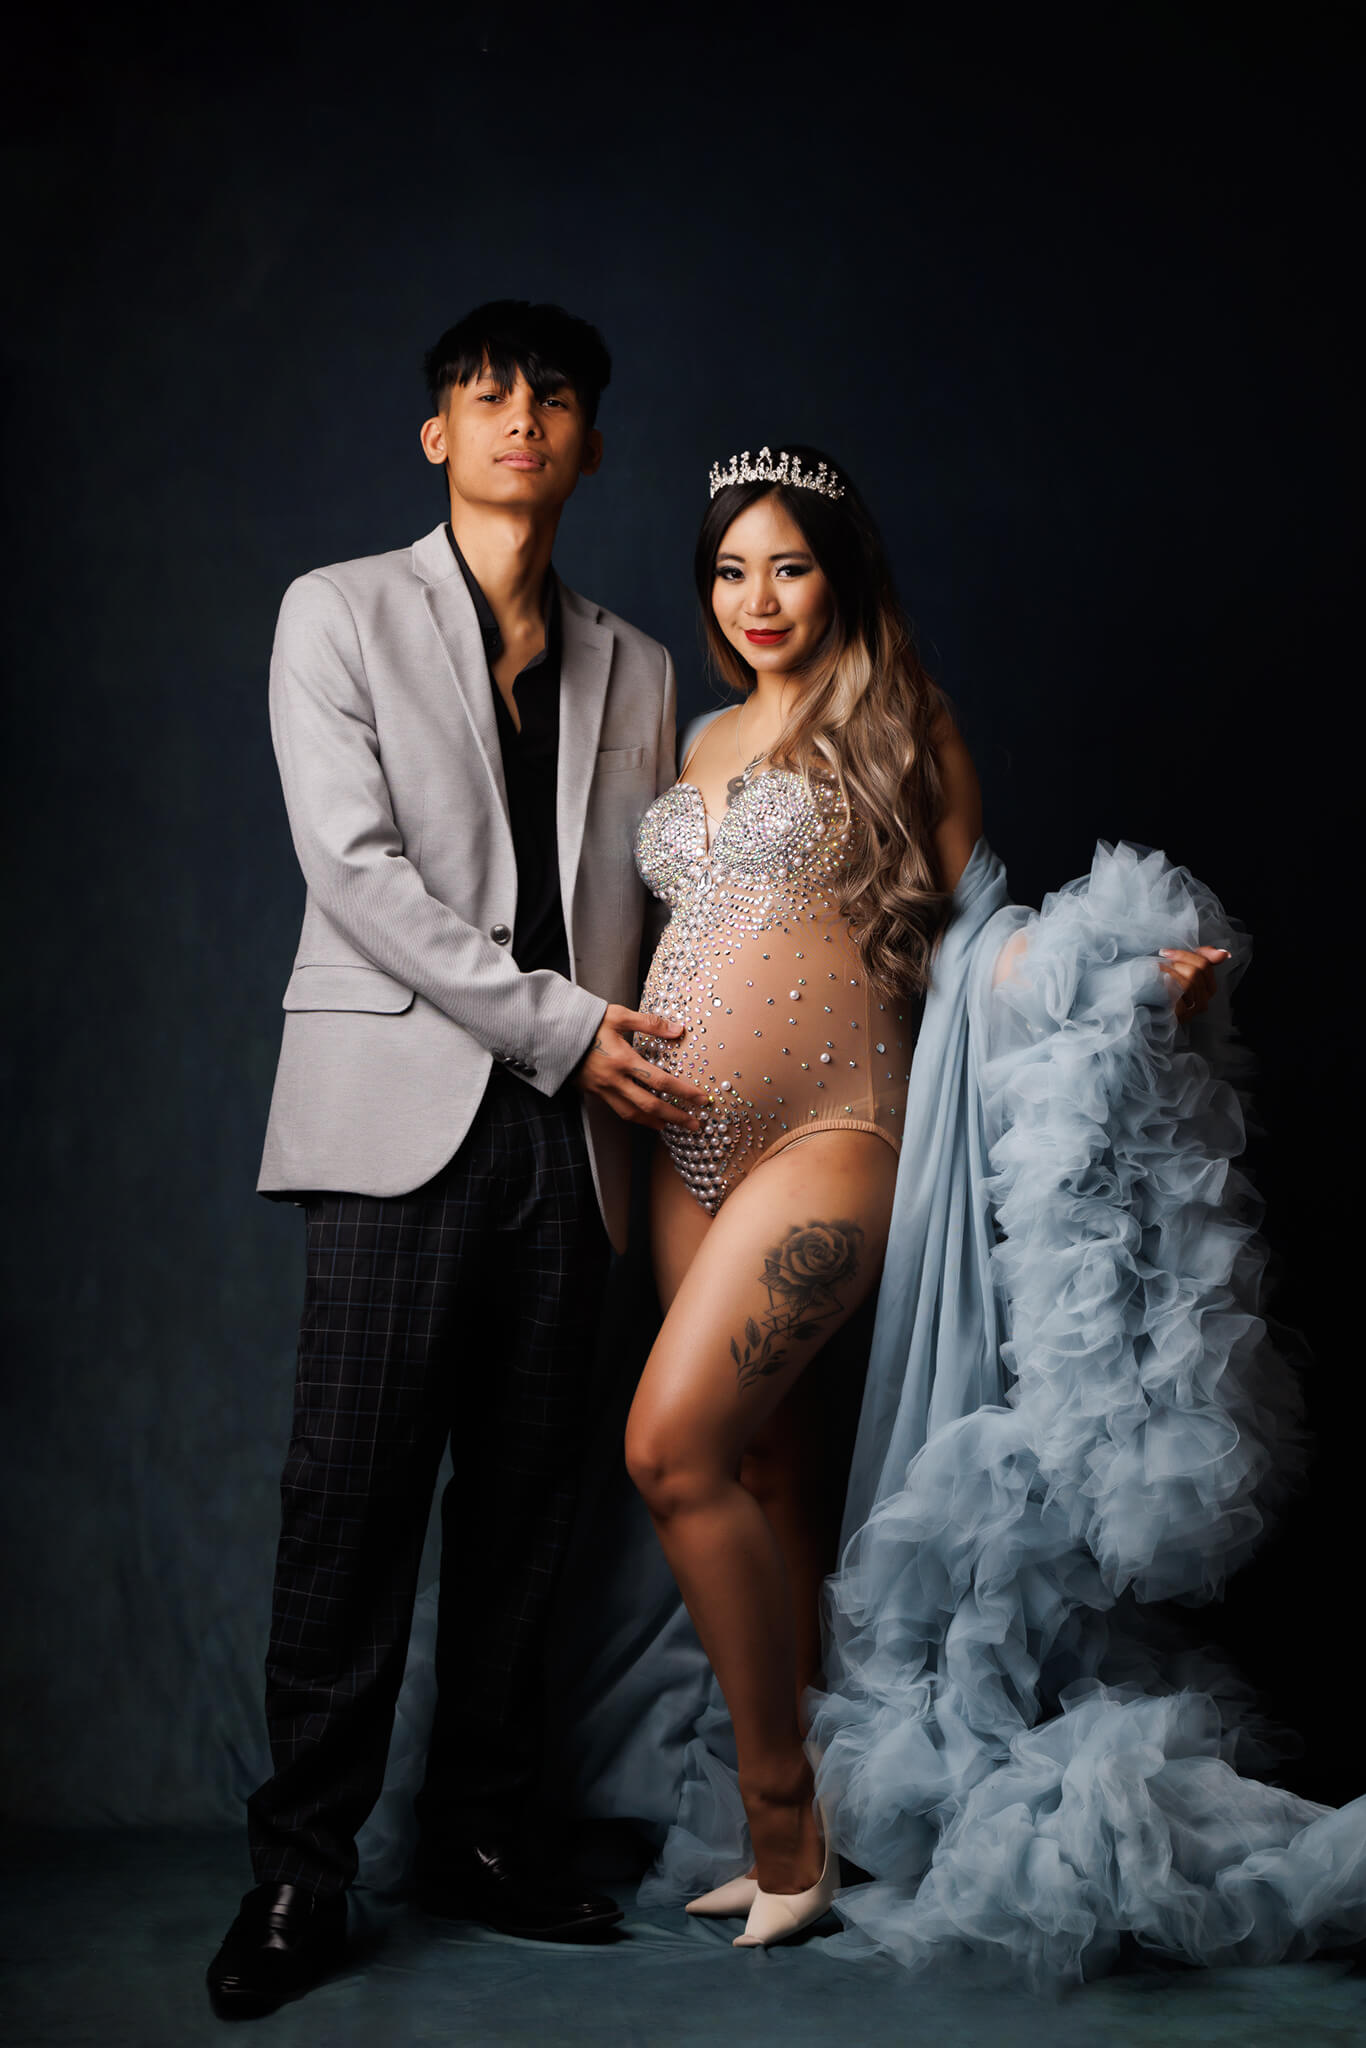 A mother to bee stands in a studio in a tule gown and bedazzled maternity one-piece while her partner stands with a hand on the bump Oona Cares